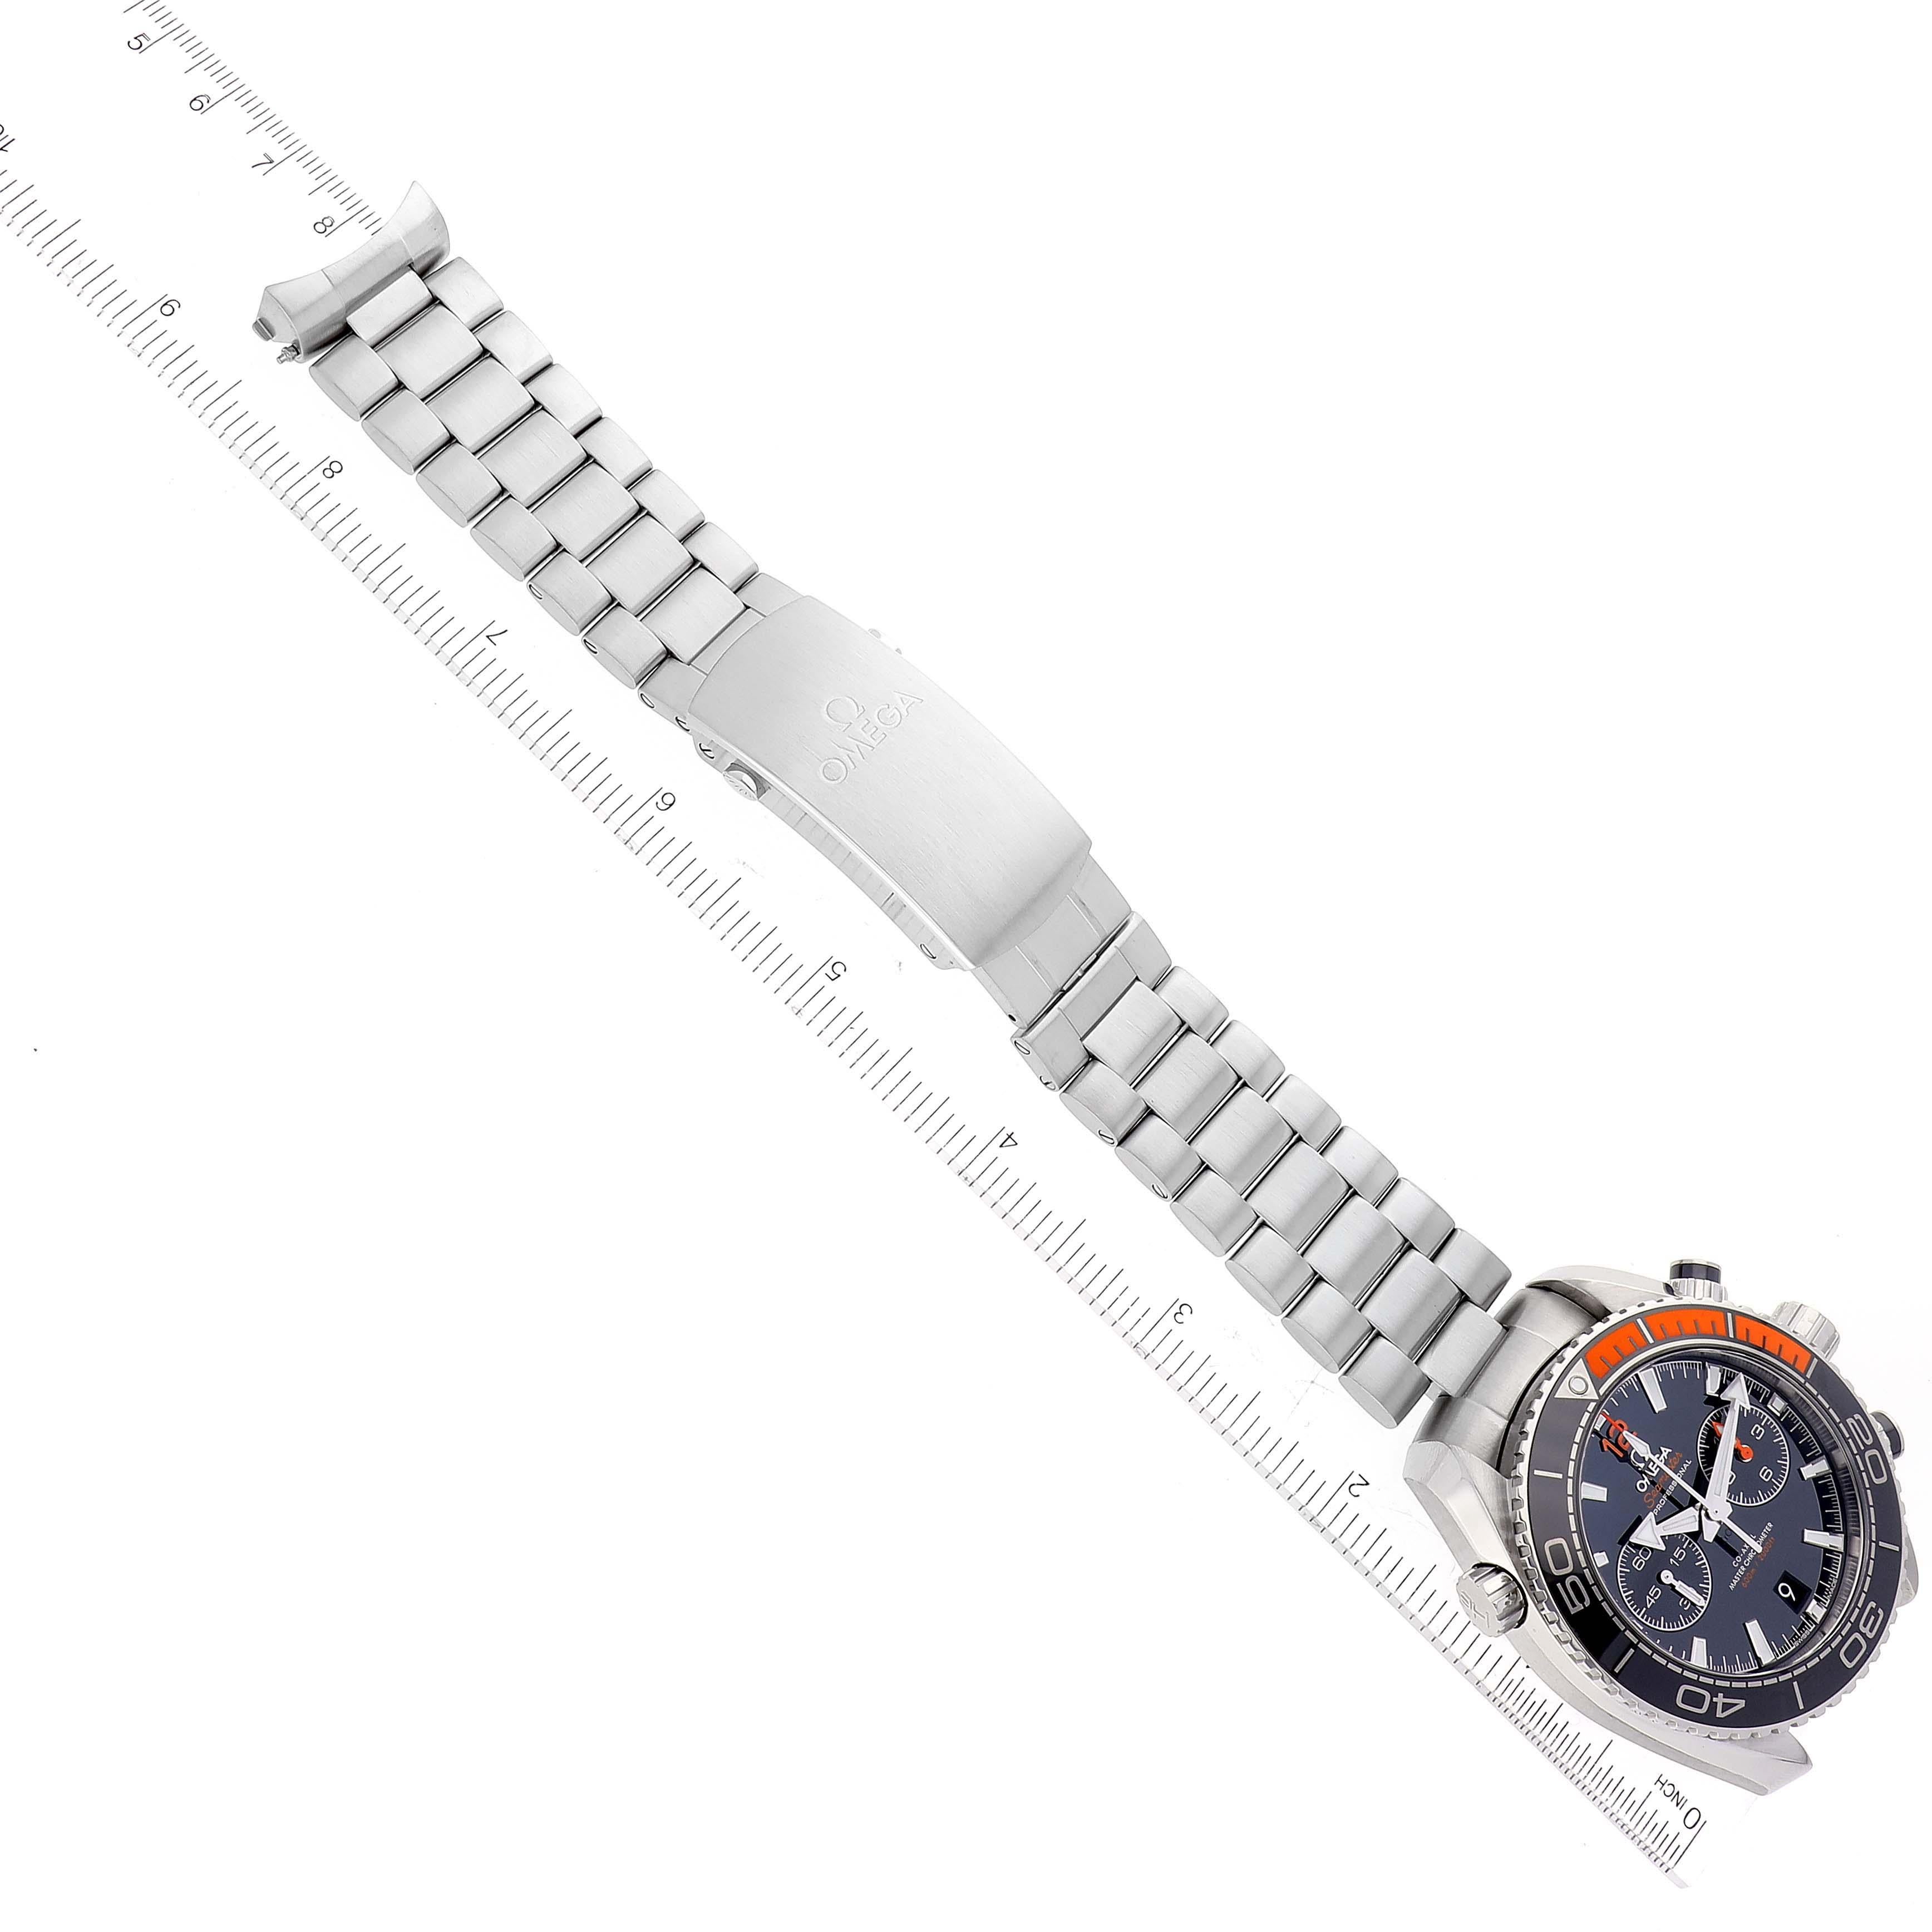 Omega Seamaster Chronograph Steel Mens Watch 215.30.46.51.01.002 Box Card For Sale 4